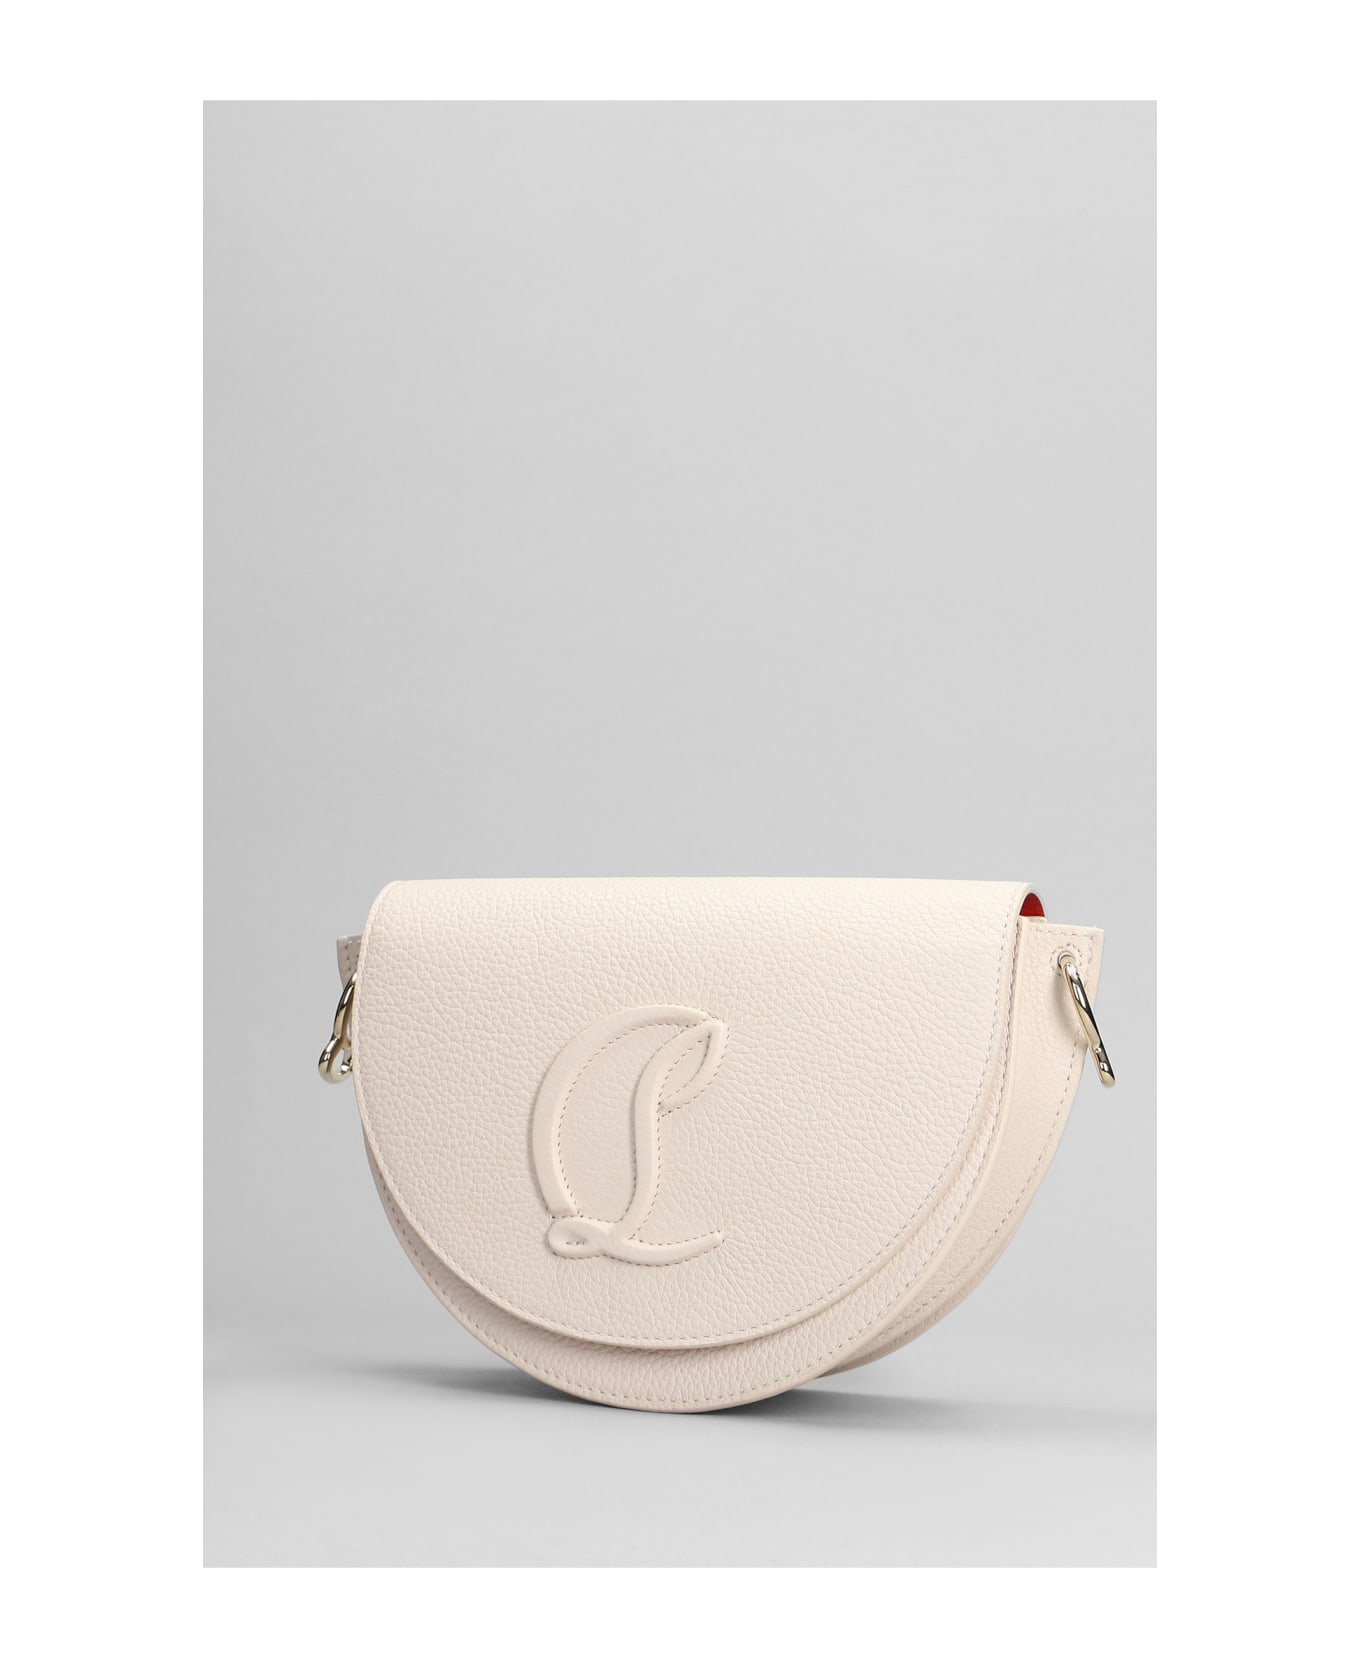 Christian Louboutin By My Side Shoulder Bag In Rose-pink Leather - rose-pink